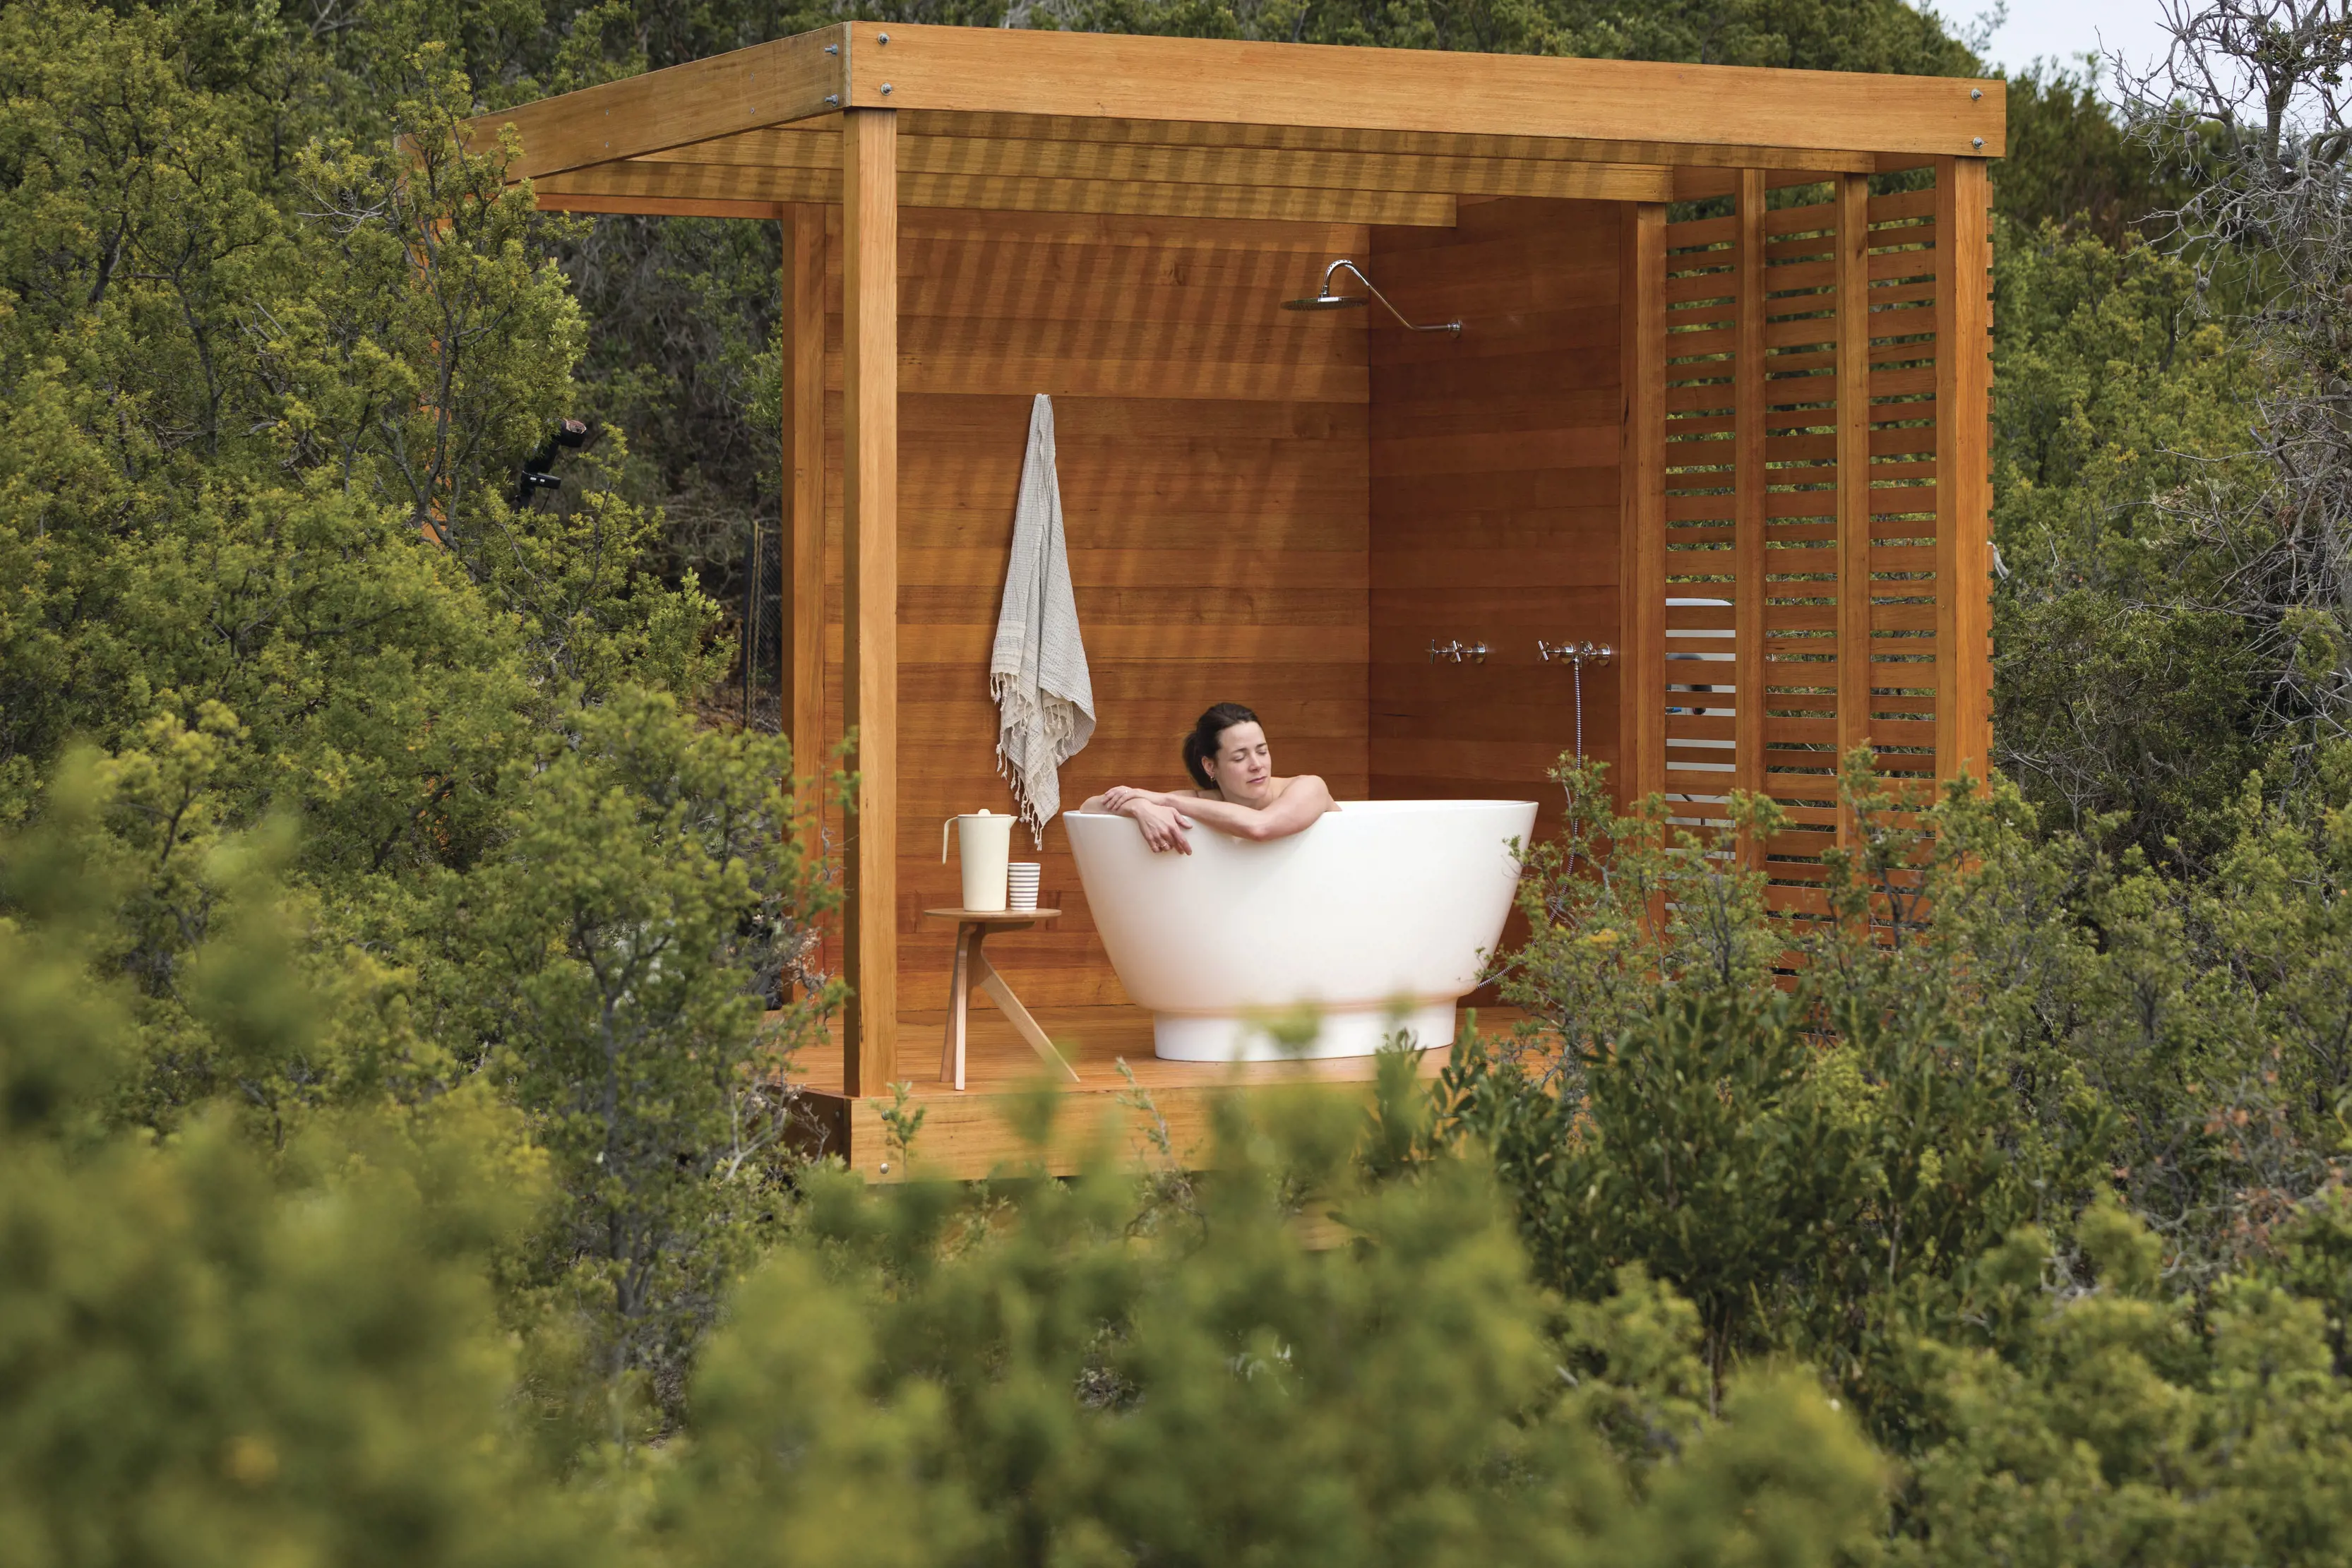 A person relaxes in the outdoor spa, located in an idyllic setting adjacent to the iconic Bay of Fires Lodge.